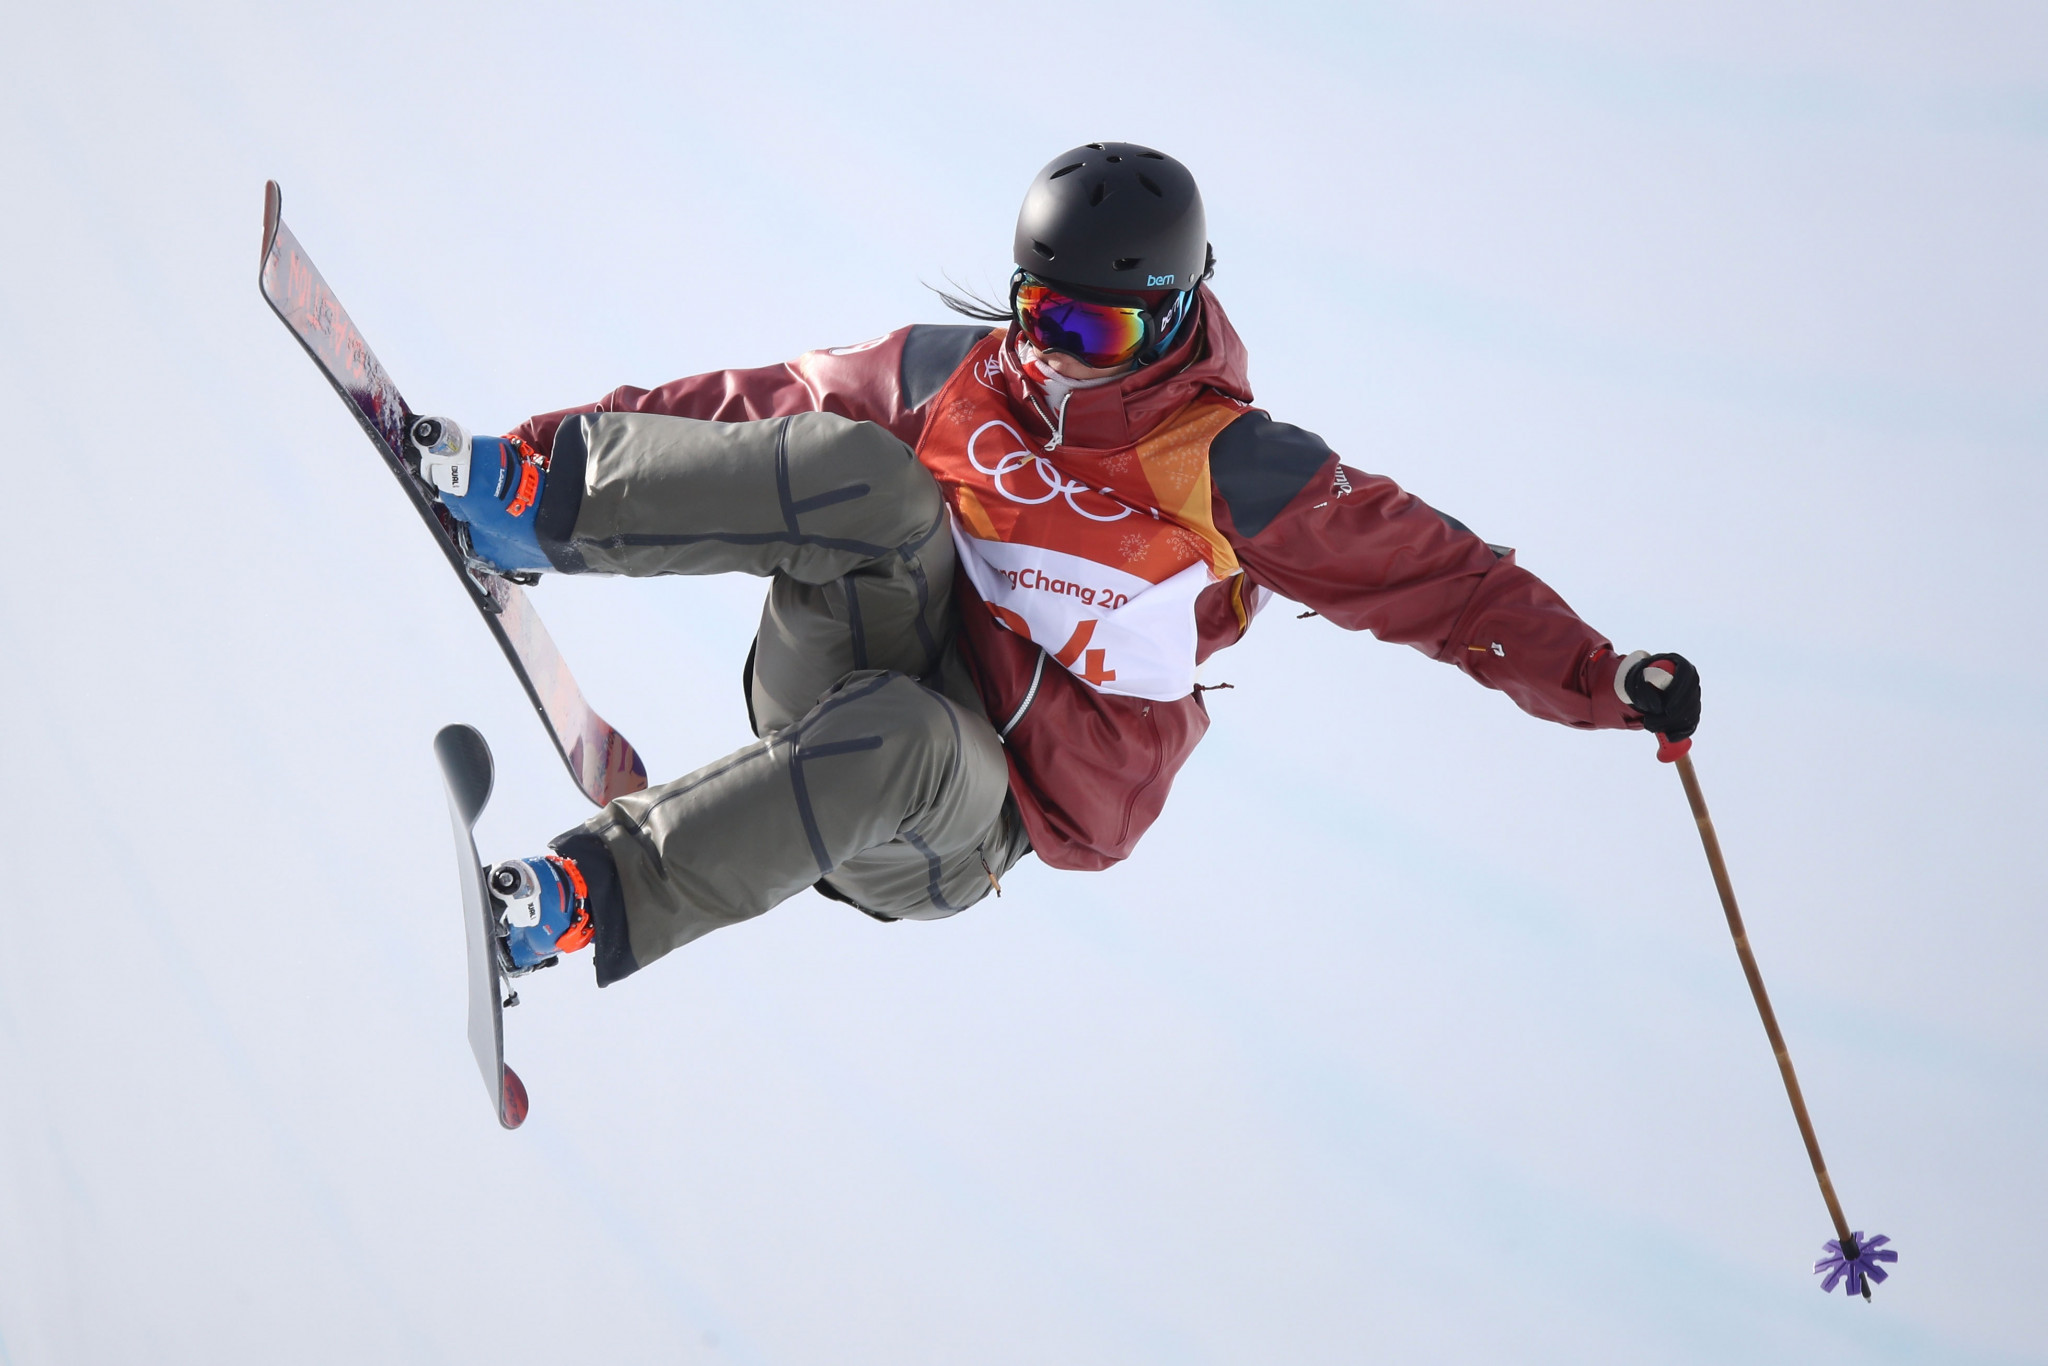 Freestyle skier Rosalind Groenewoud also features among the new members ©Getty Images